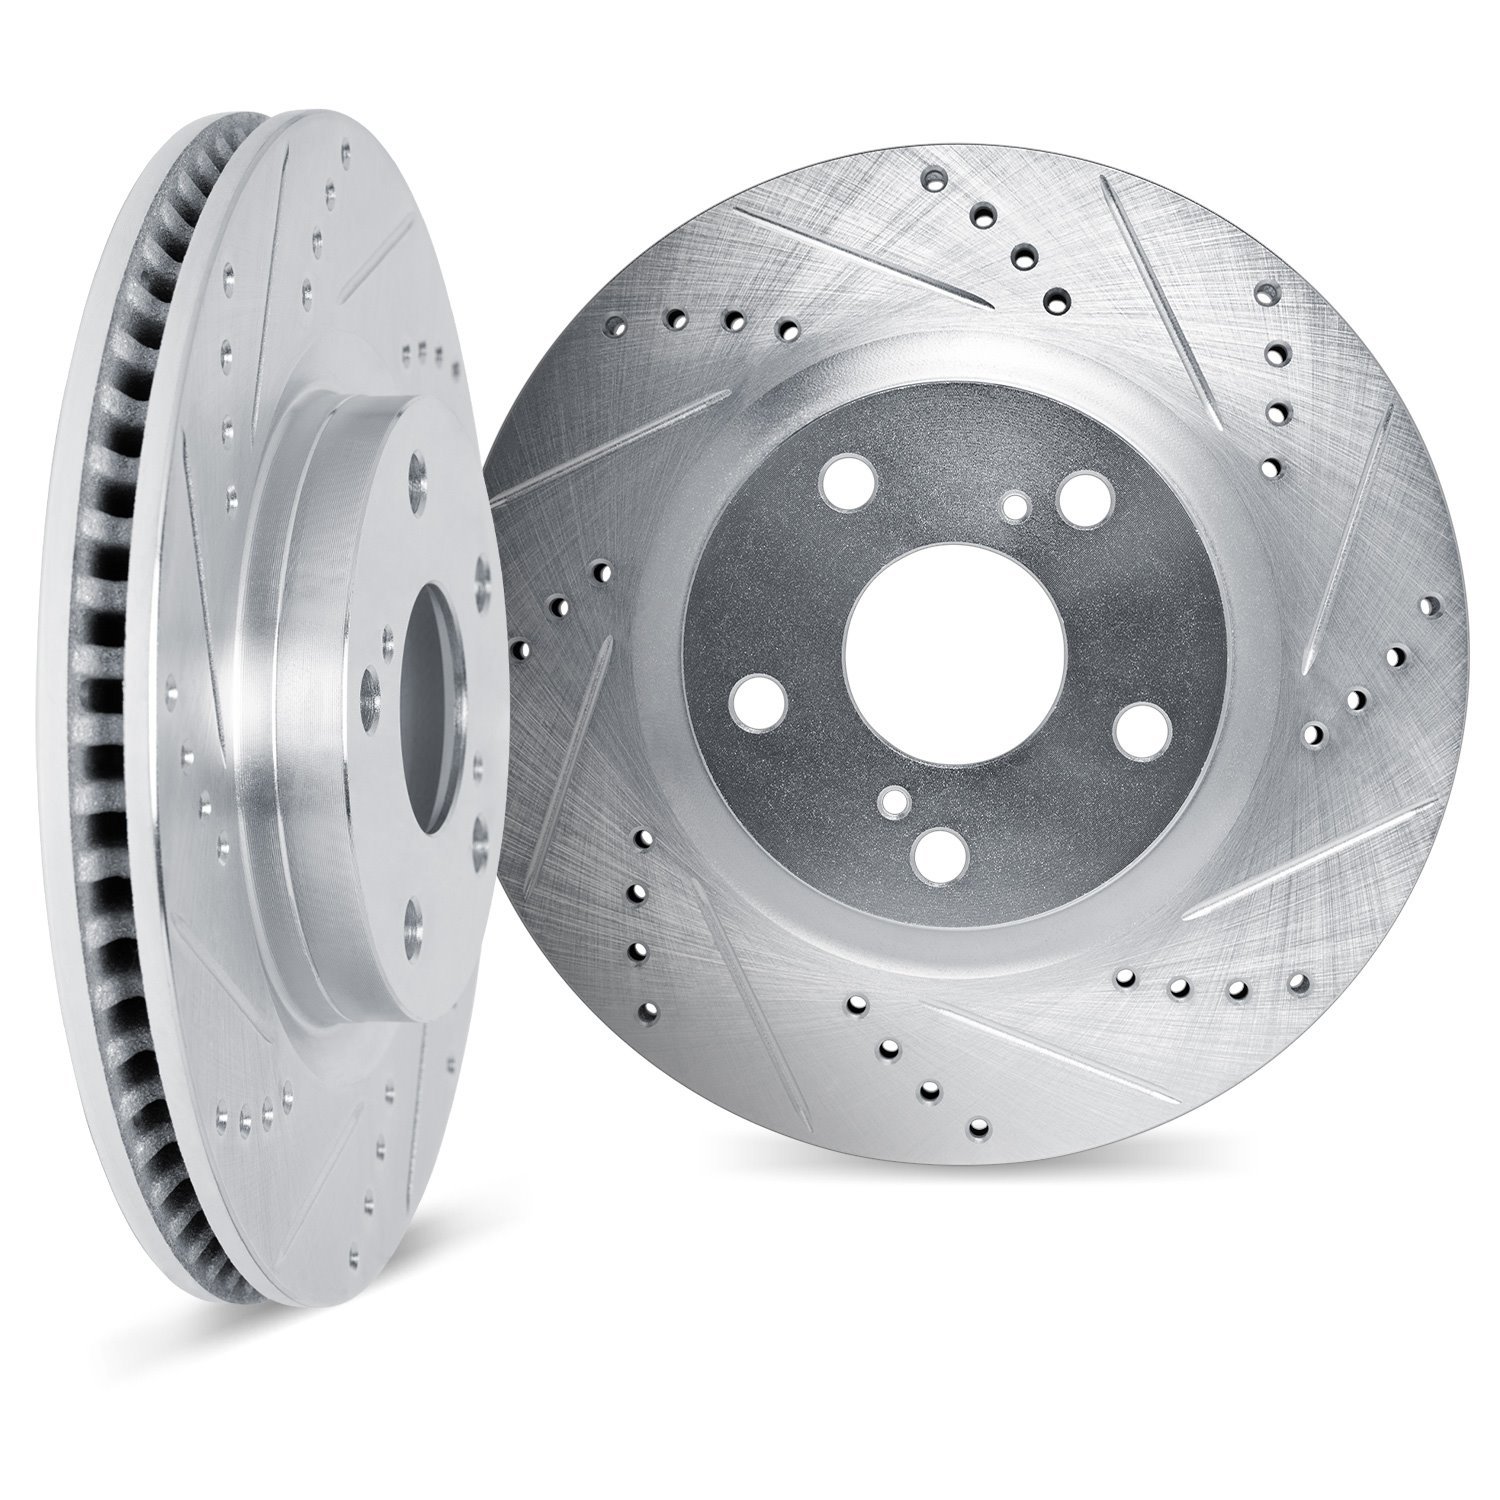 7002-76139 Drilled/Slotted Brake Rotors [Silver], Fits Select Lexus/Toyota/Scion, Position: Rear